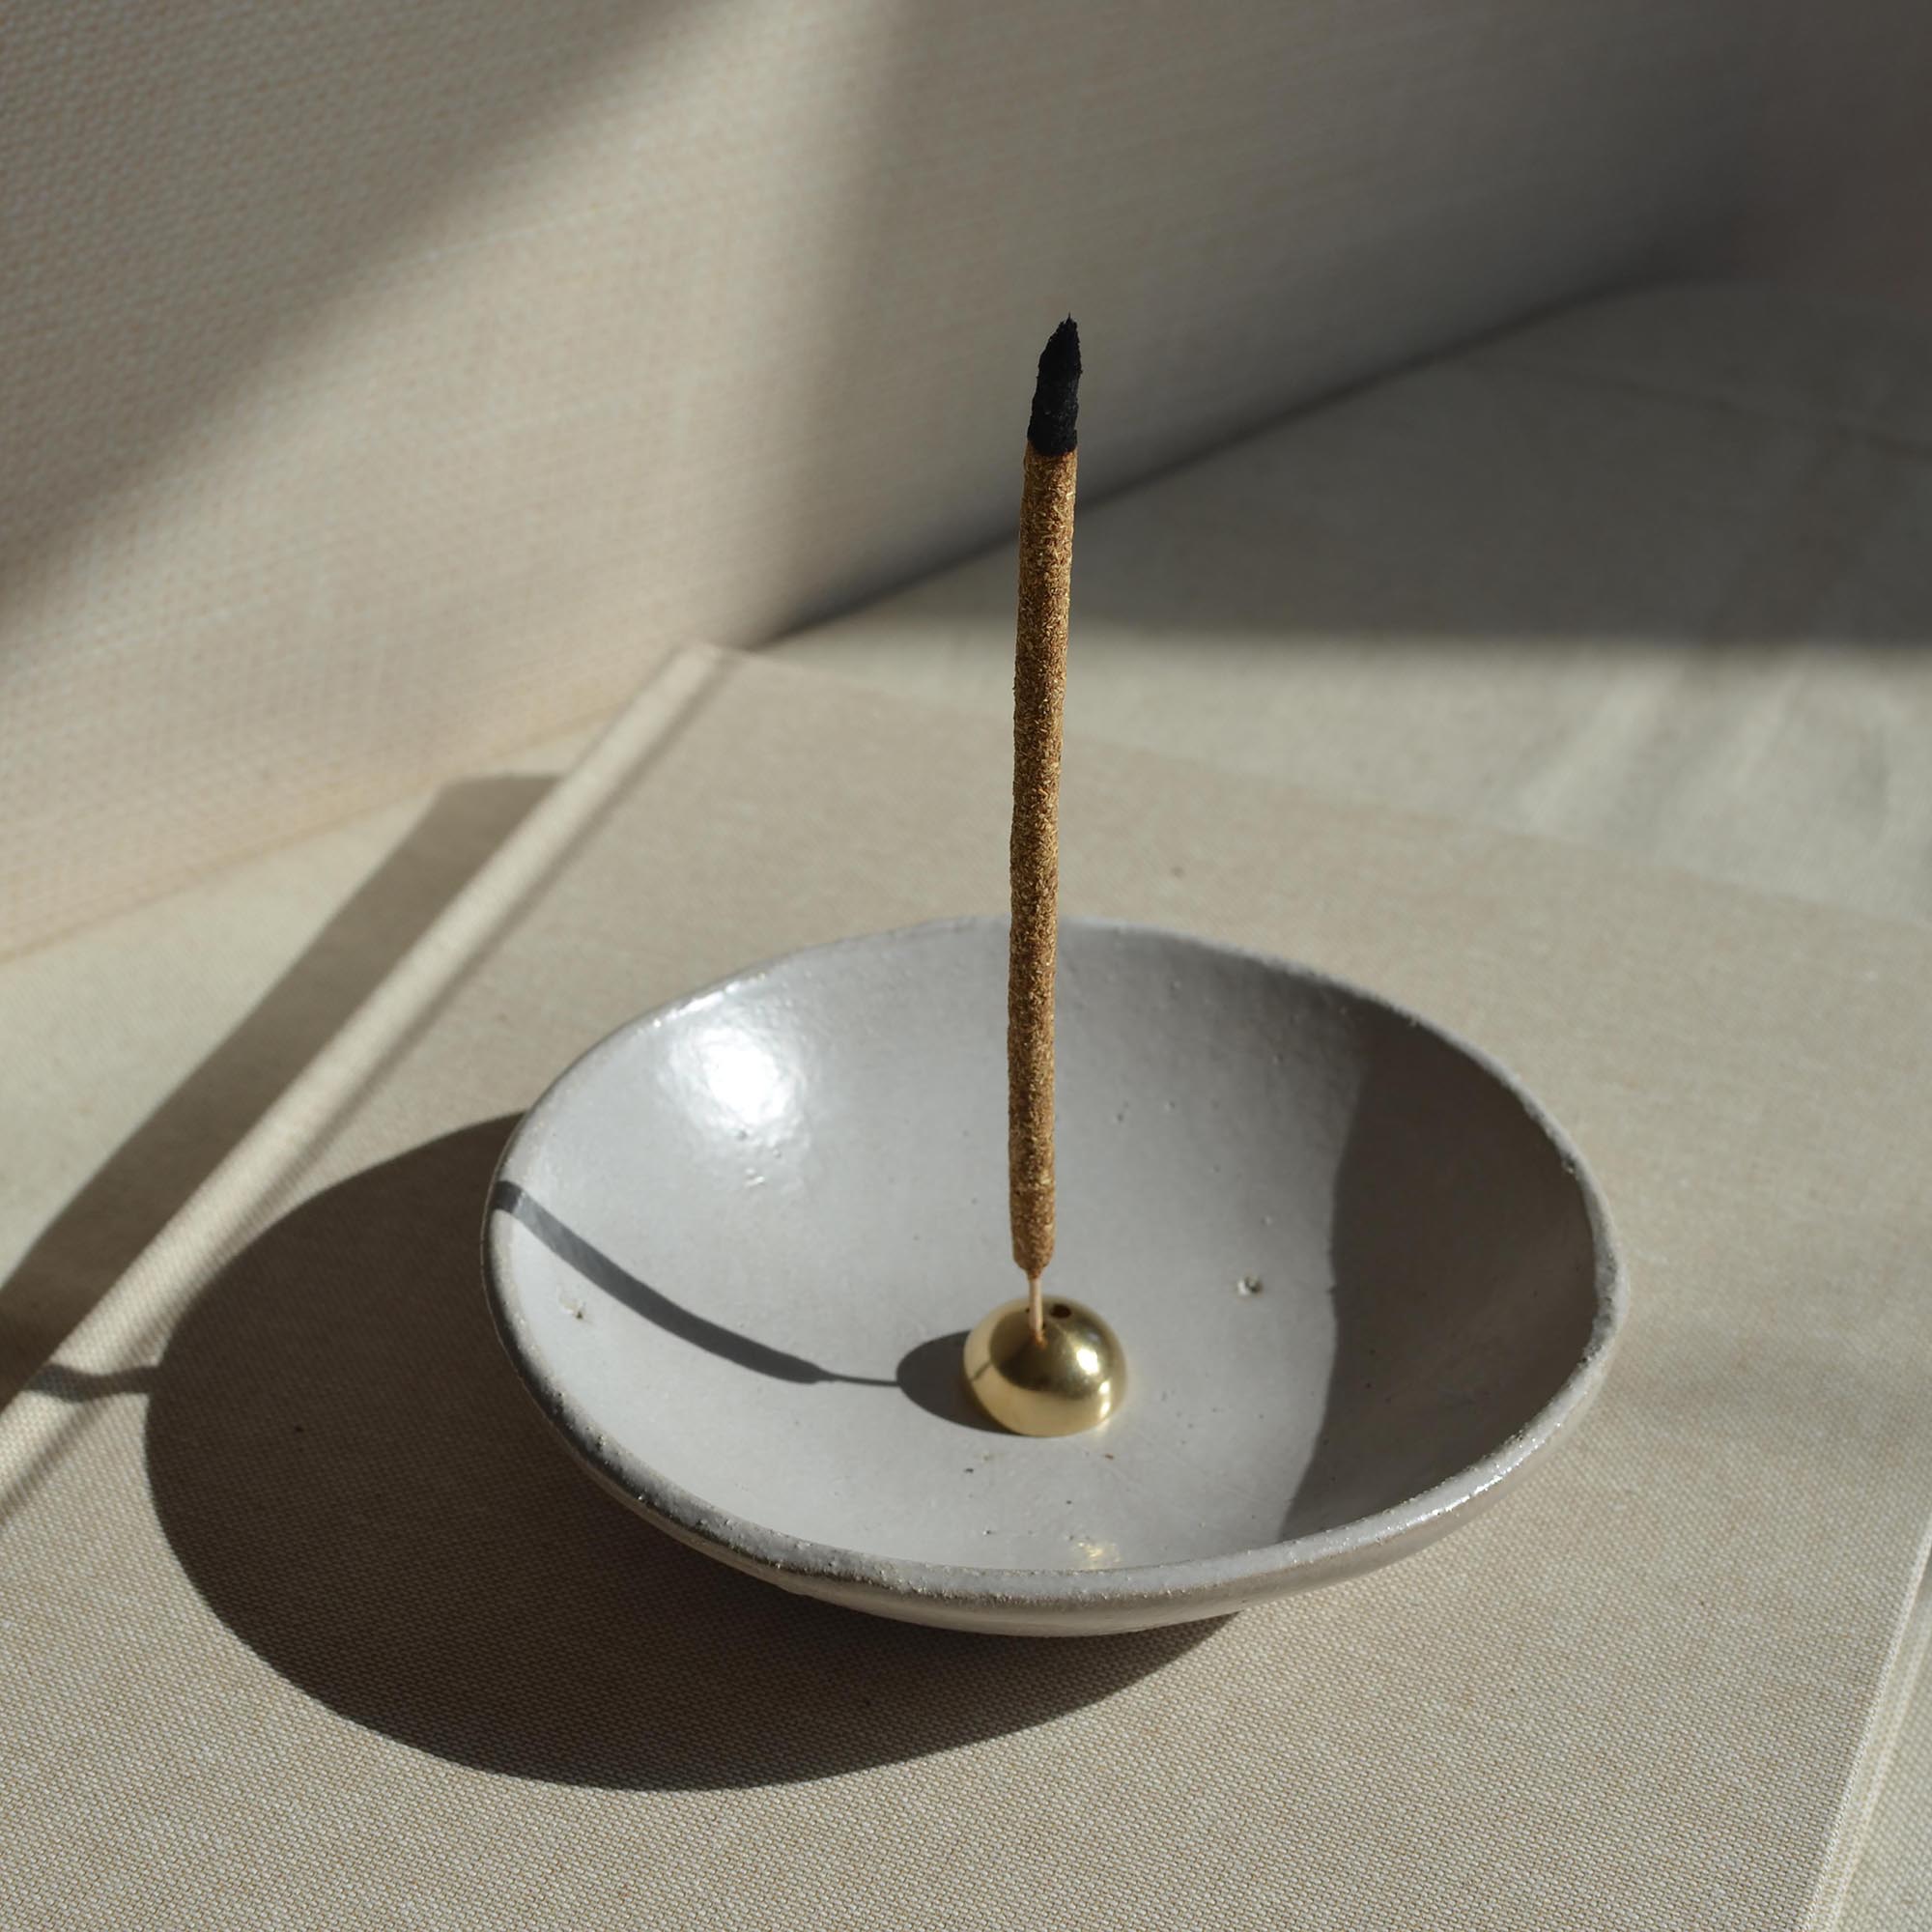 incense stick with incense holder with a brass placing on the incense bowl